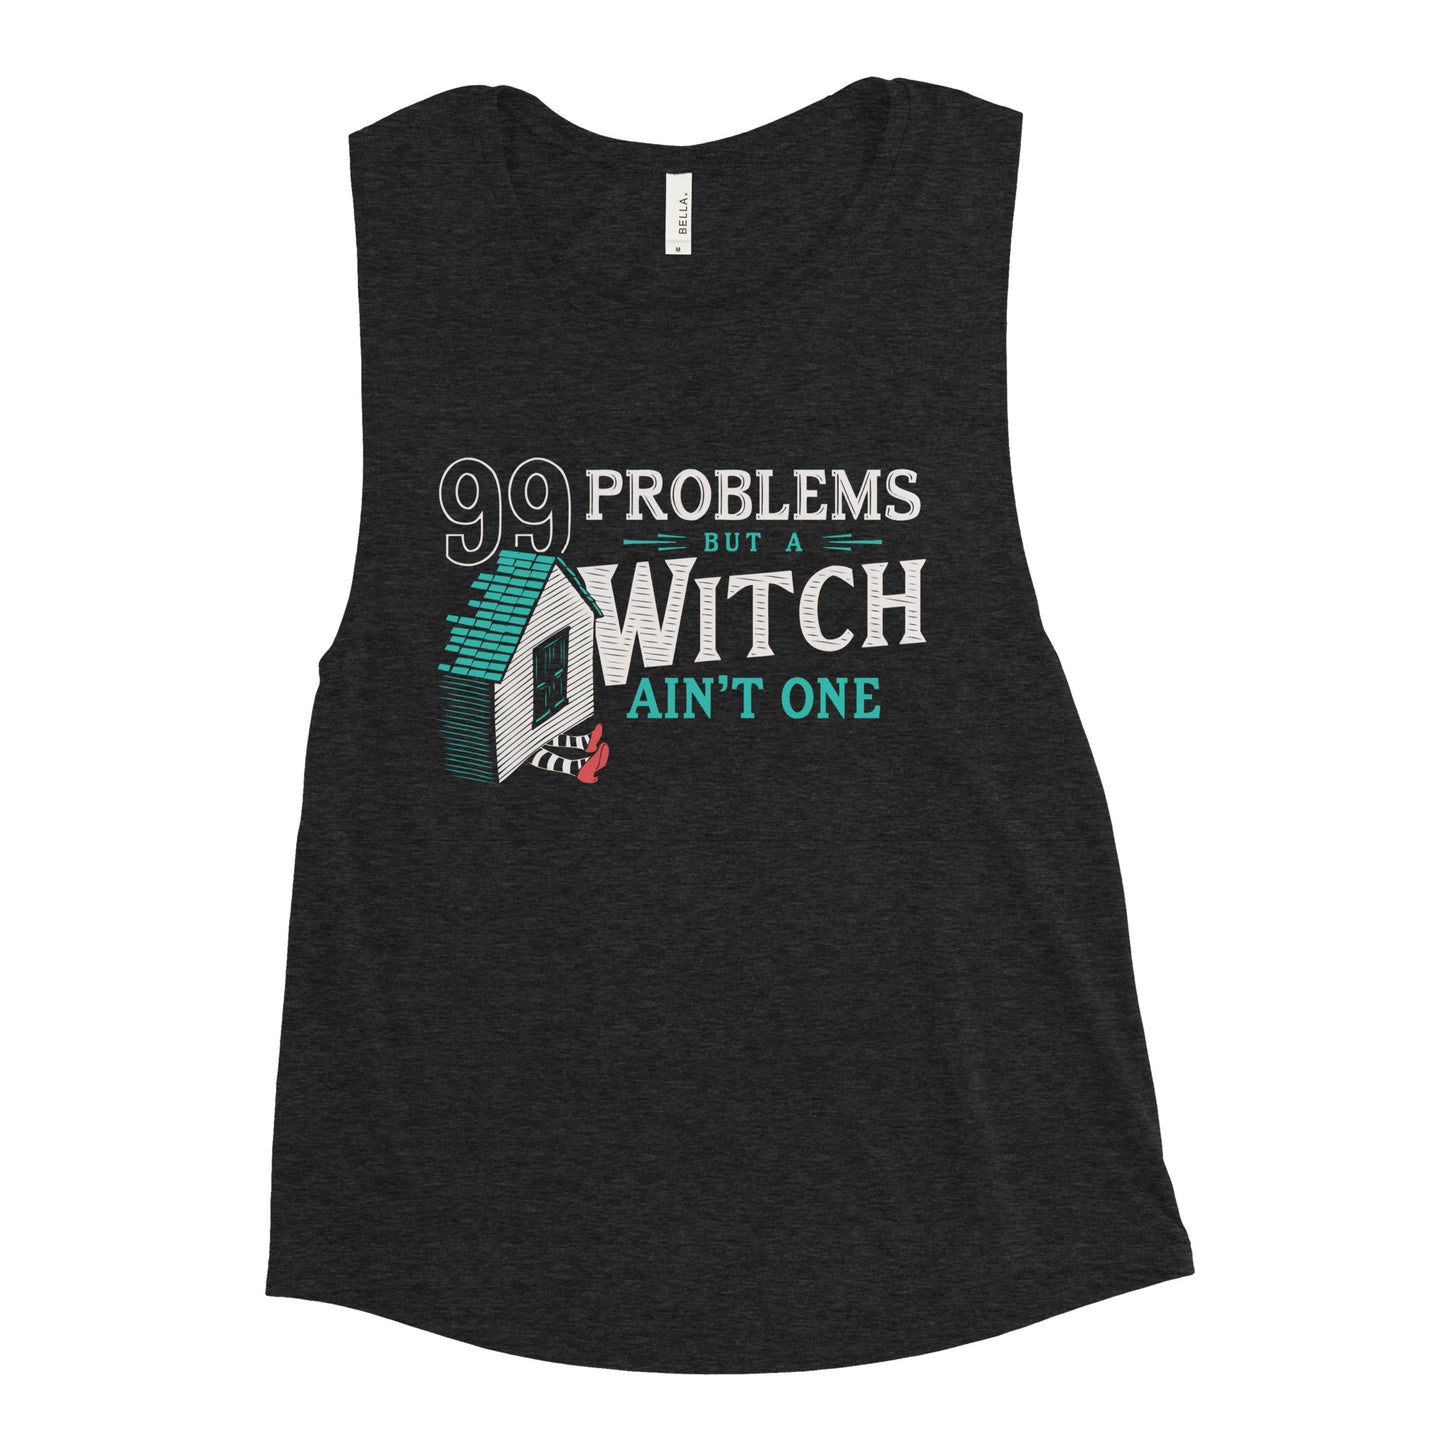 99 Problems But A Witch Ain't One Women's Muscle Tank